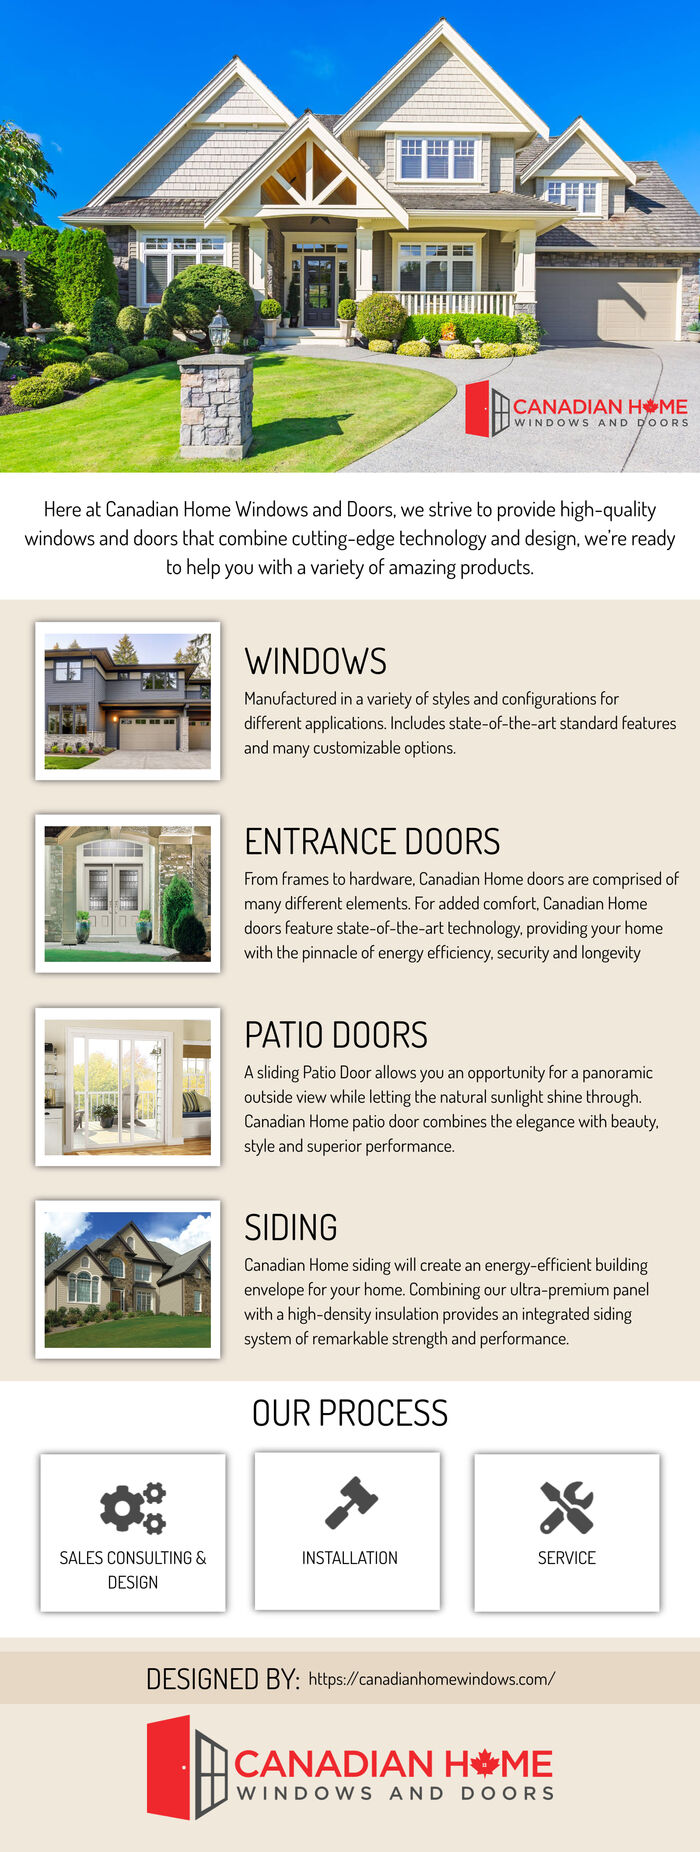 This infographic is designed by Canadian Home Windows  Doors